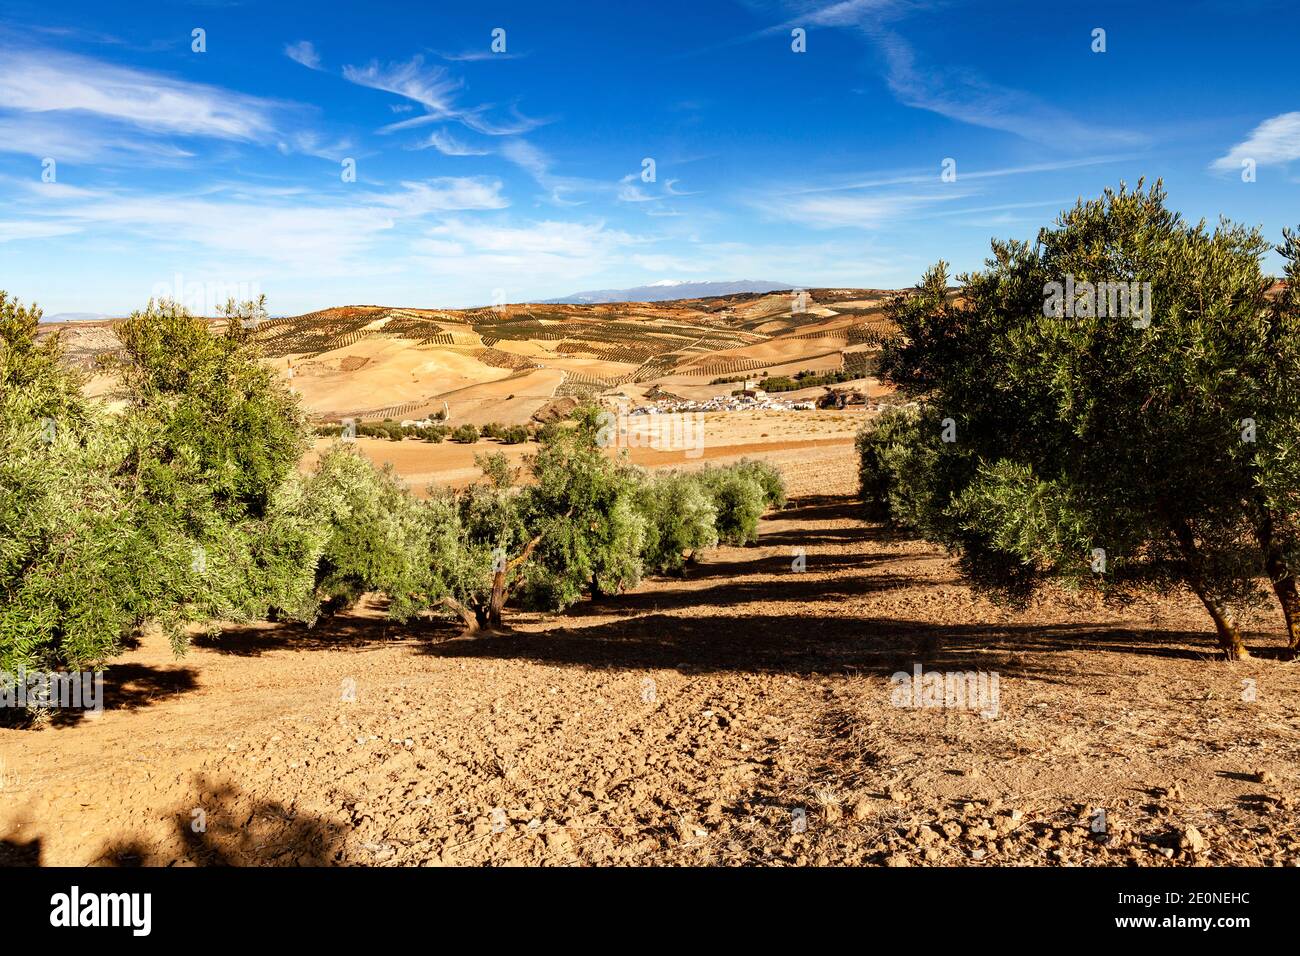 A view through an Olive Grove of Alhama de Granada, an ancient town with Roman and Moorish influences, Province of Granada, Spain Stock Photo